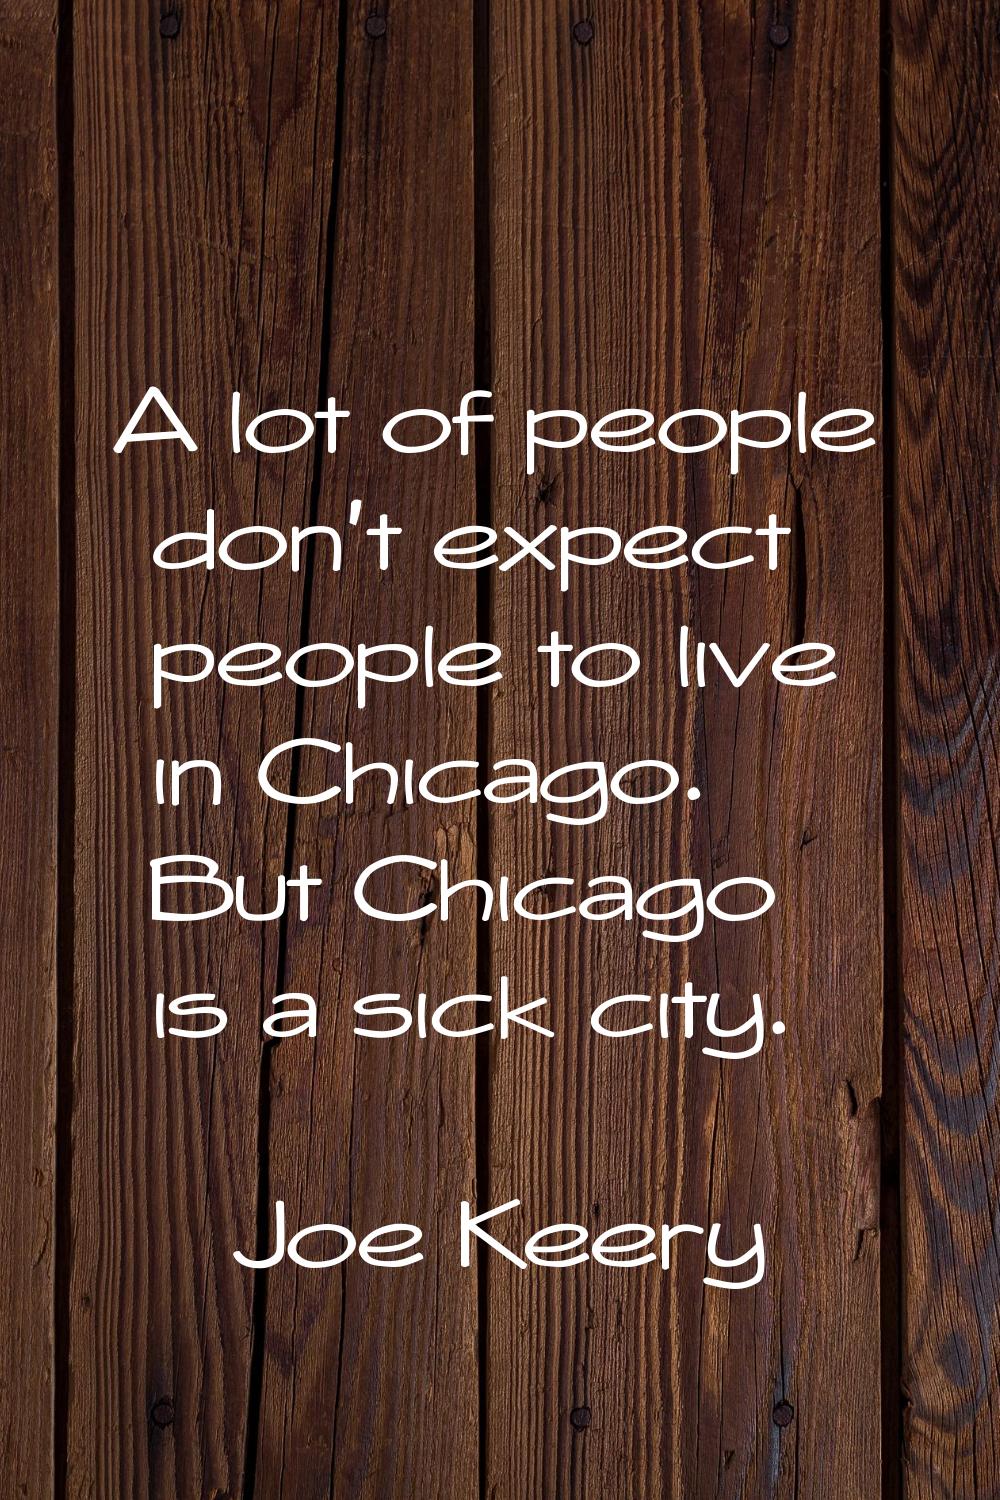 A lot of people don't expect people to live in Chicago. But Chicago is a sick city.